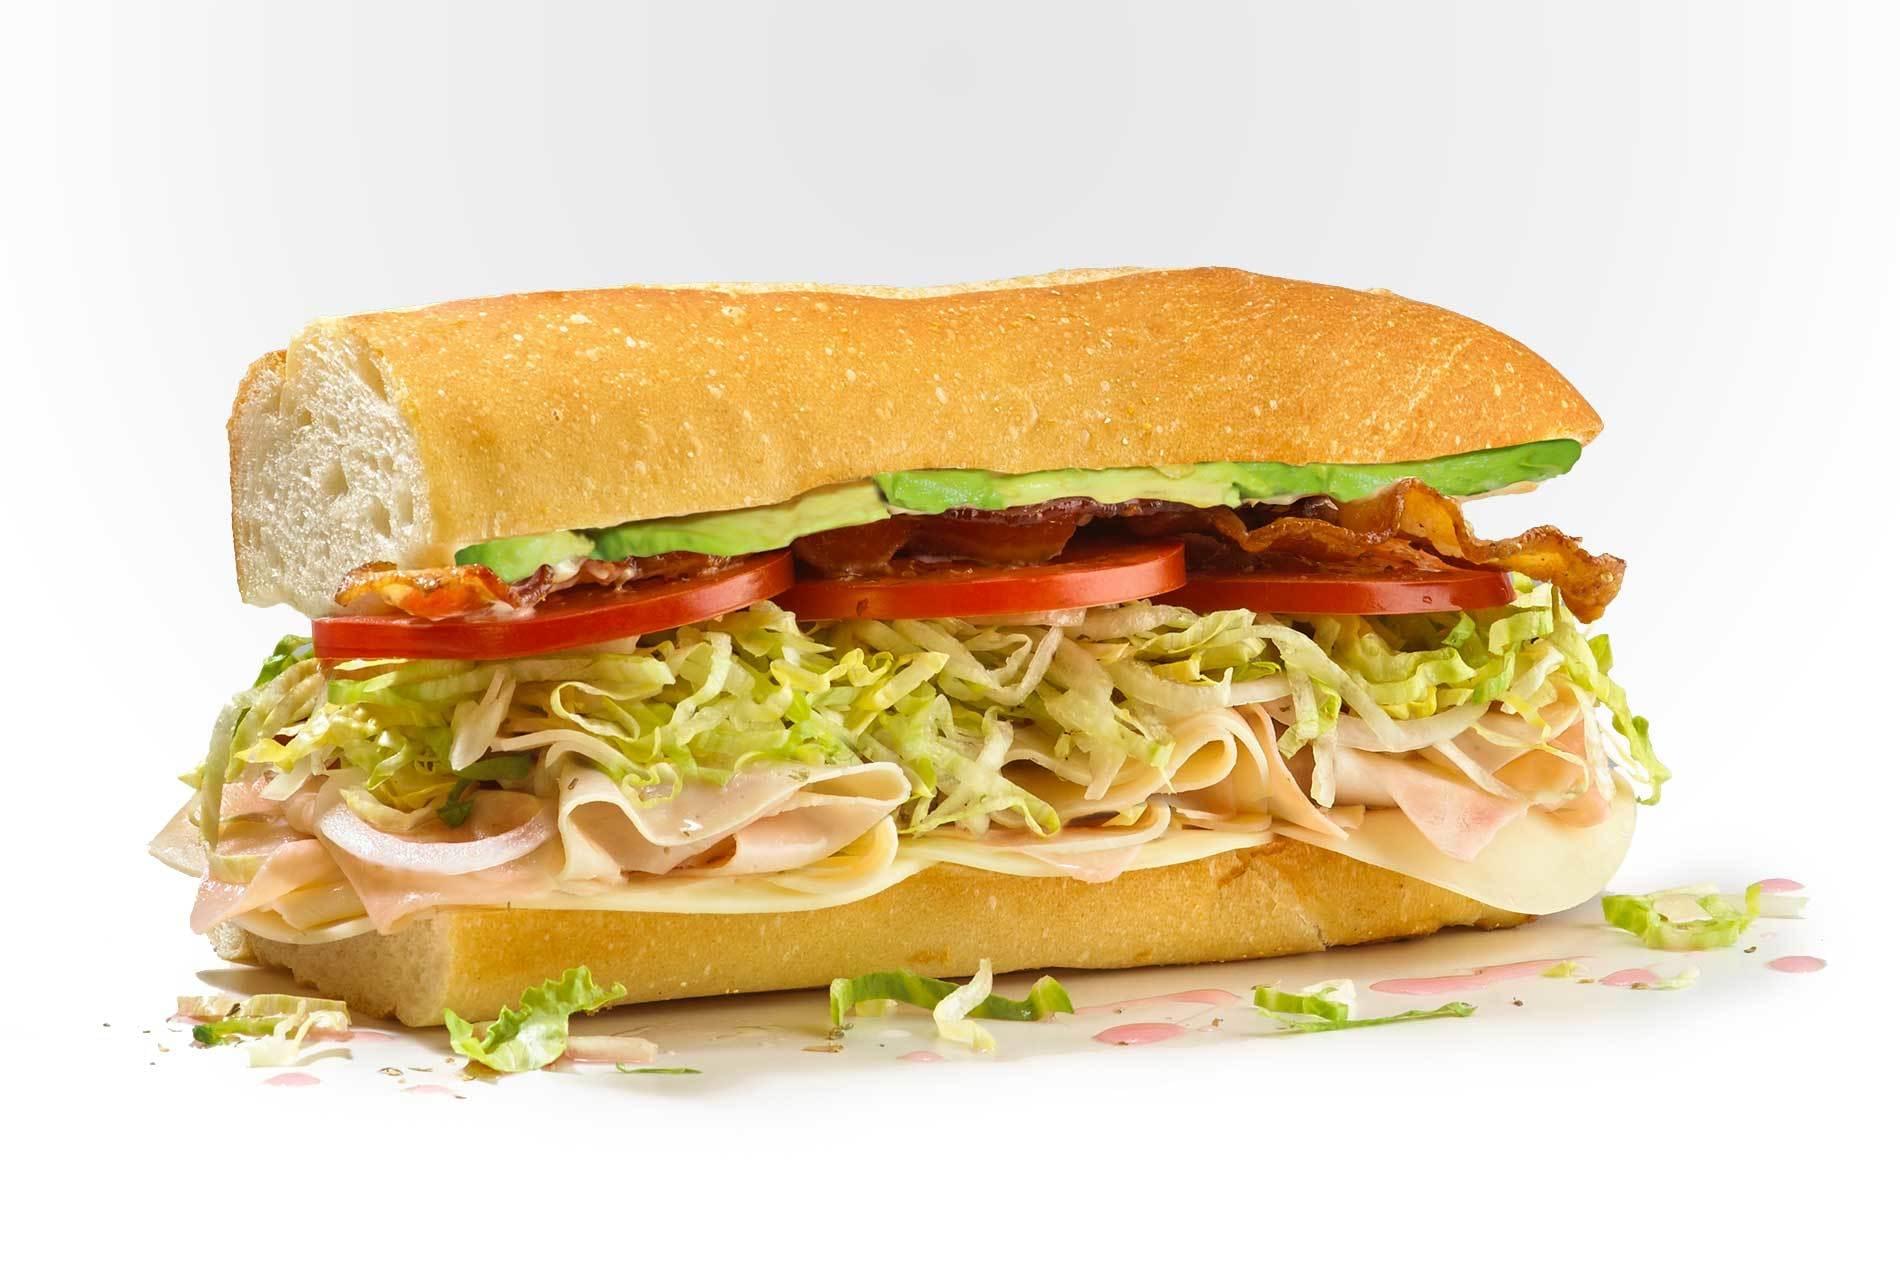 Jersey Mike's Regular California Club Sub Nutrition Facts